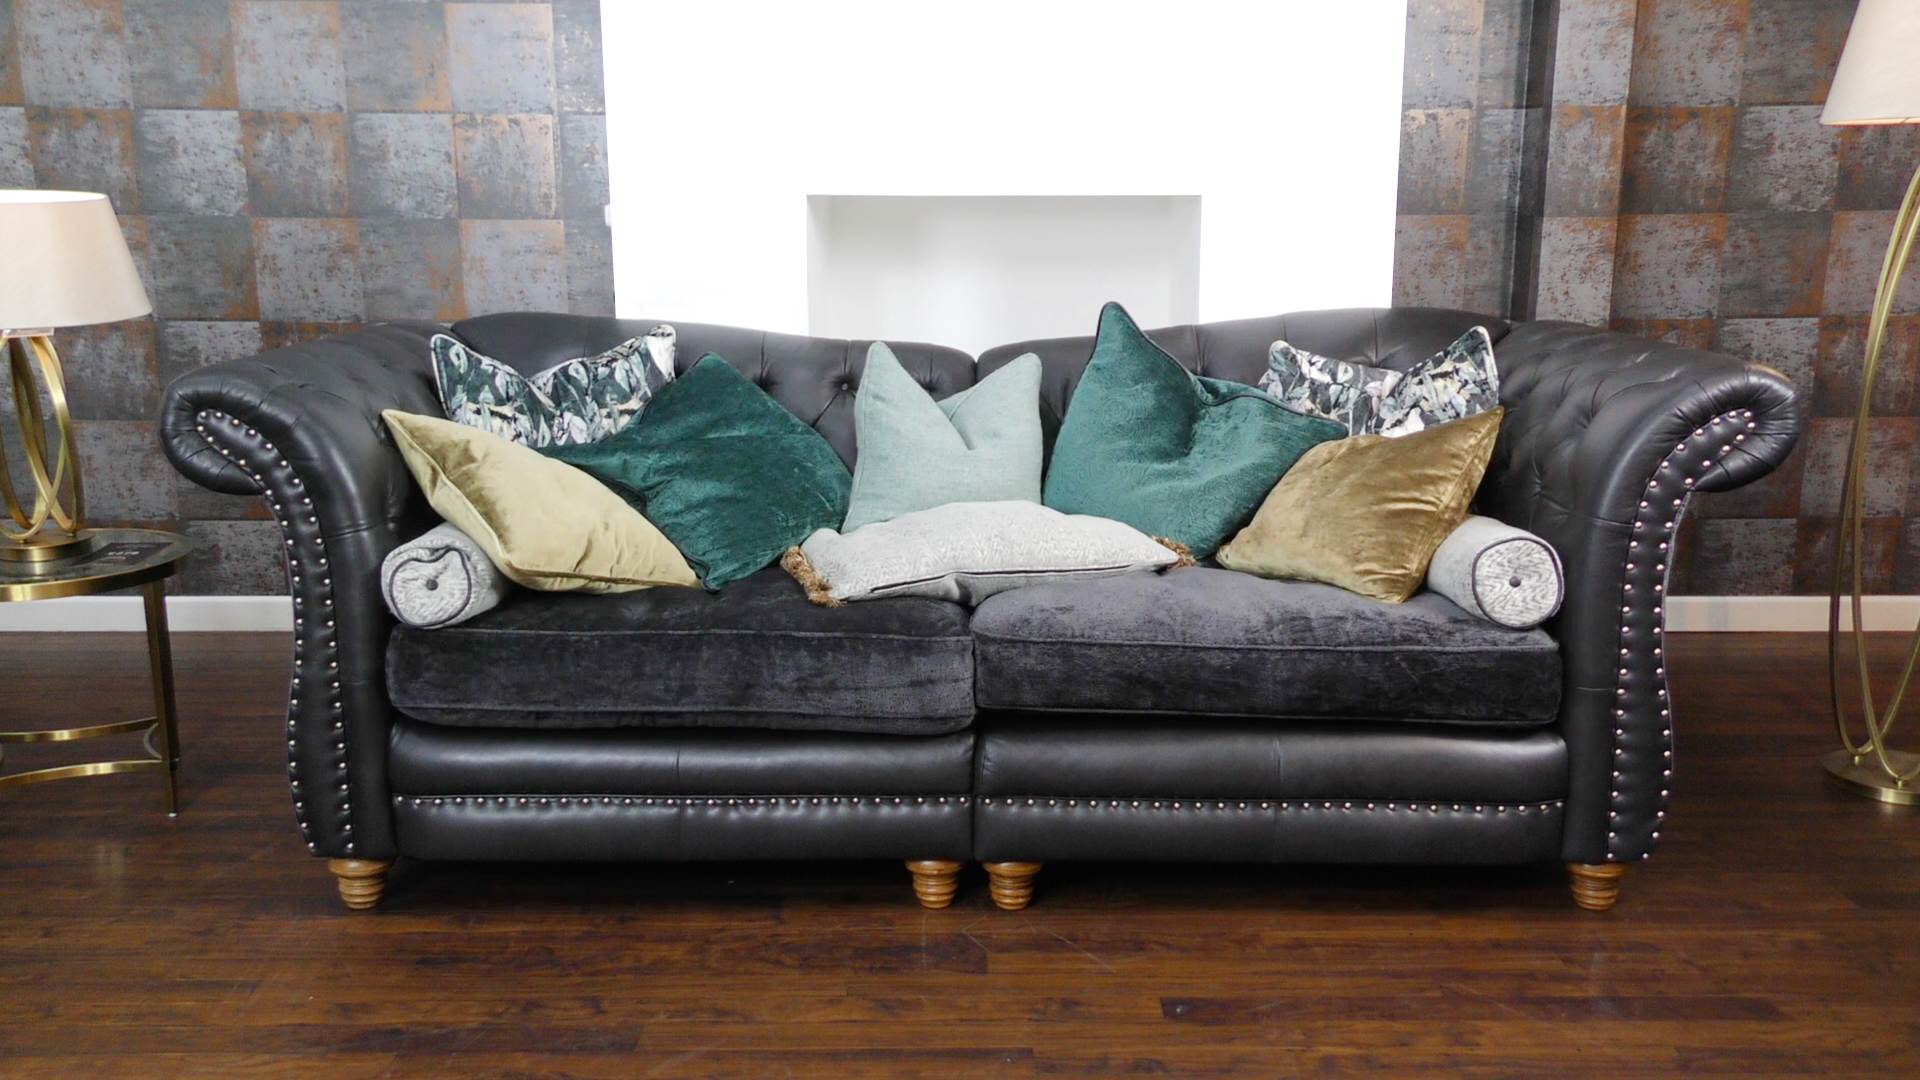 The Easiest Way To Plump Up Your Couch Cushions